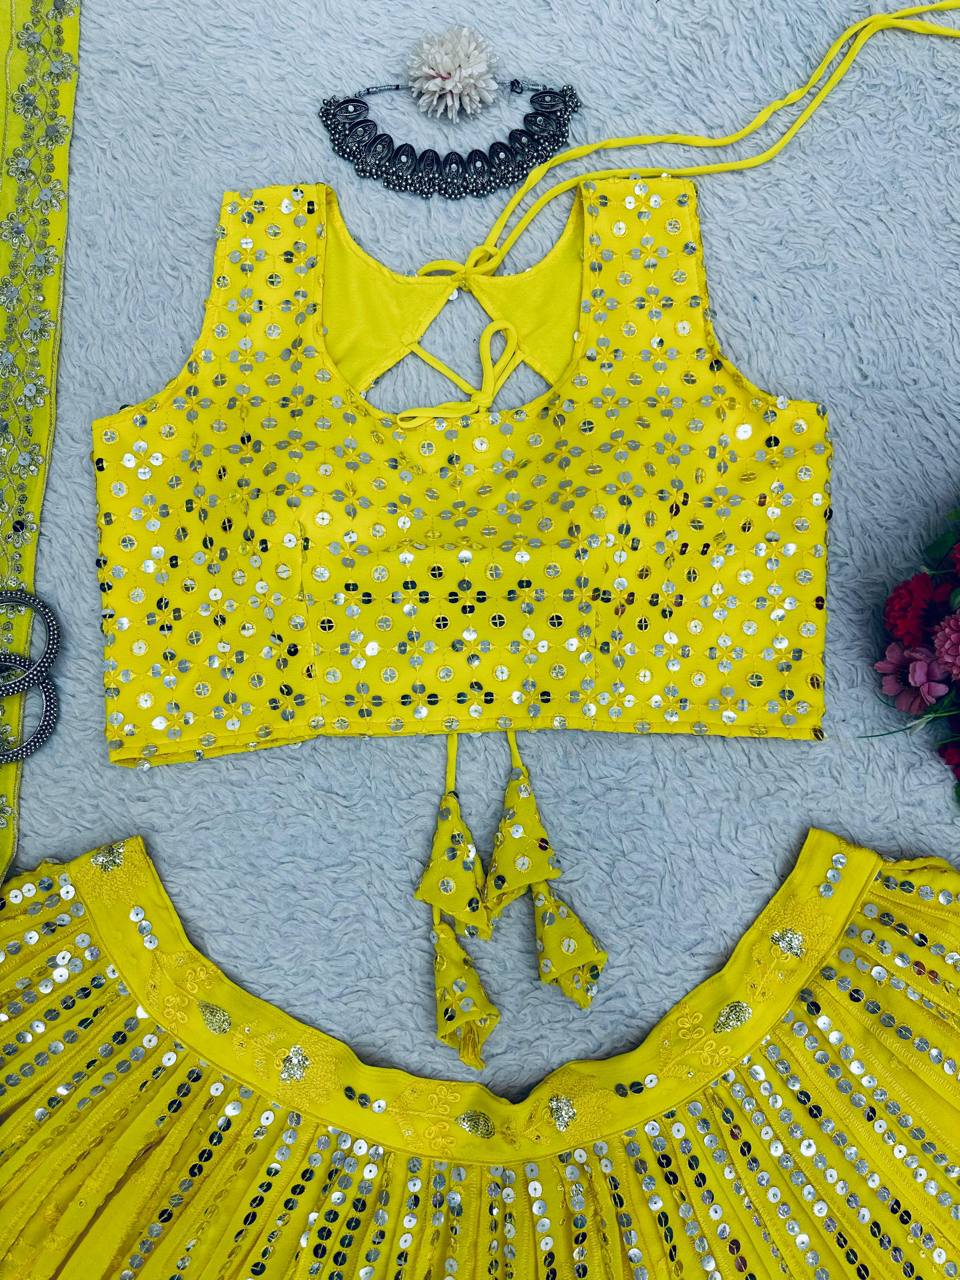 Elegant Yellow Colour Sequence Embroidary Work Lehenga Choli With Can Can And Beautiful Desinger Blouse